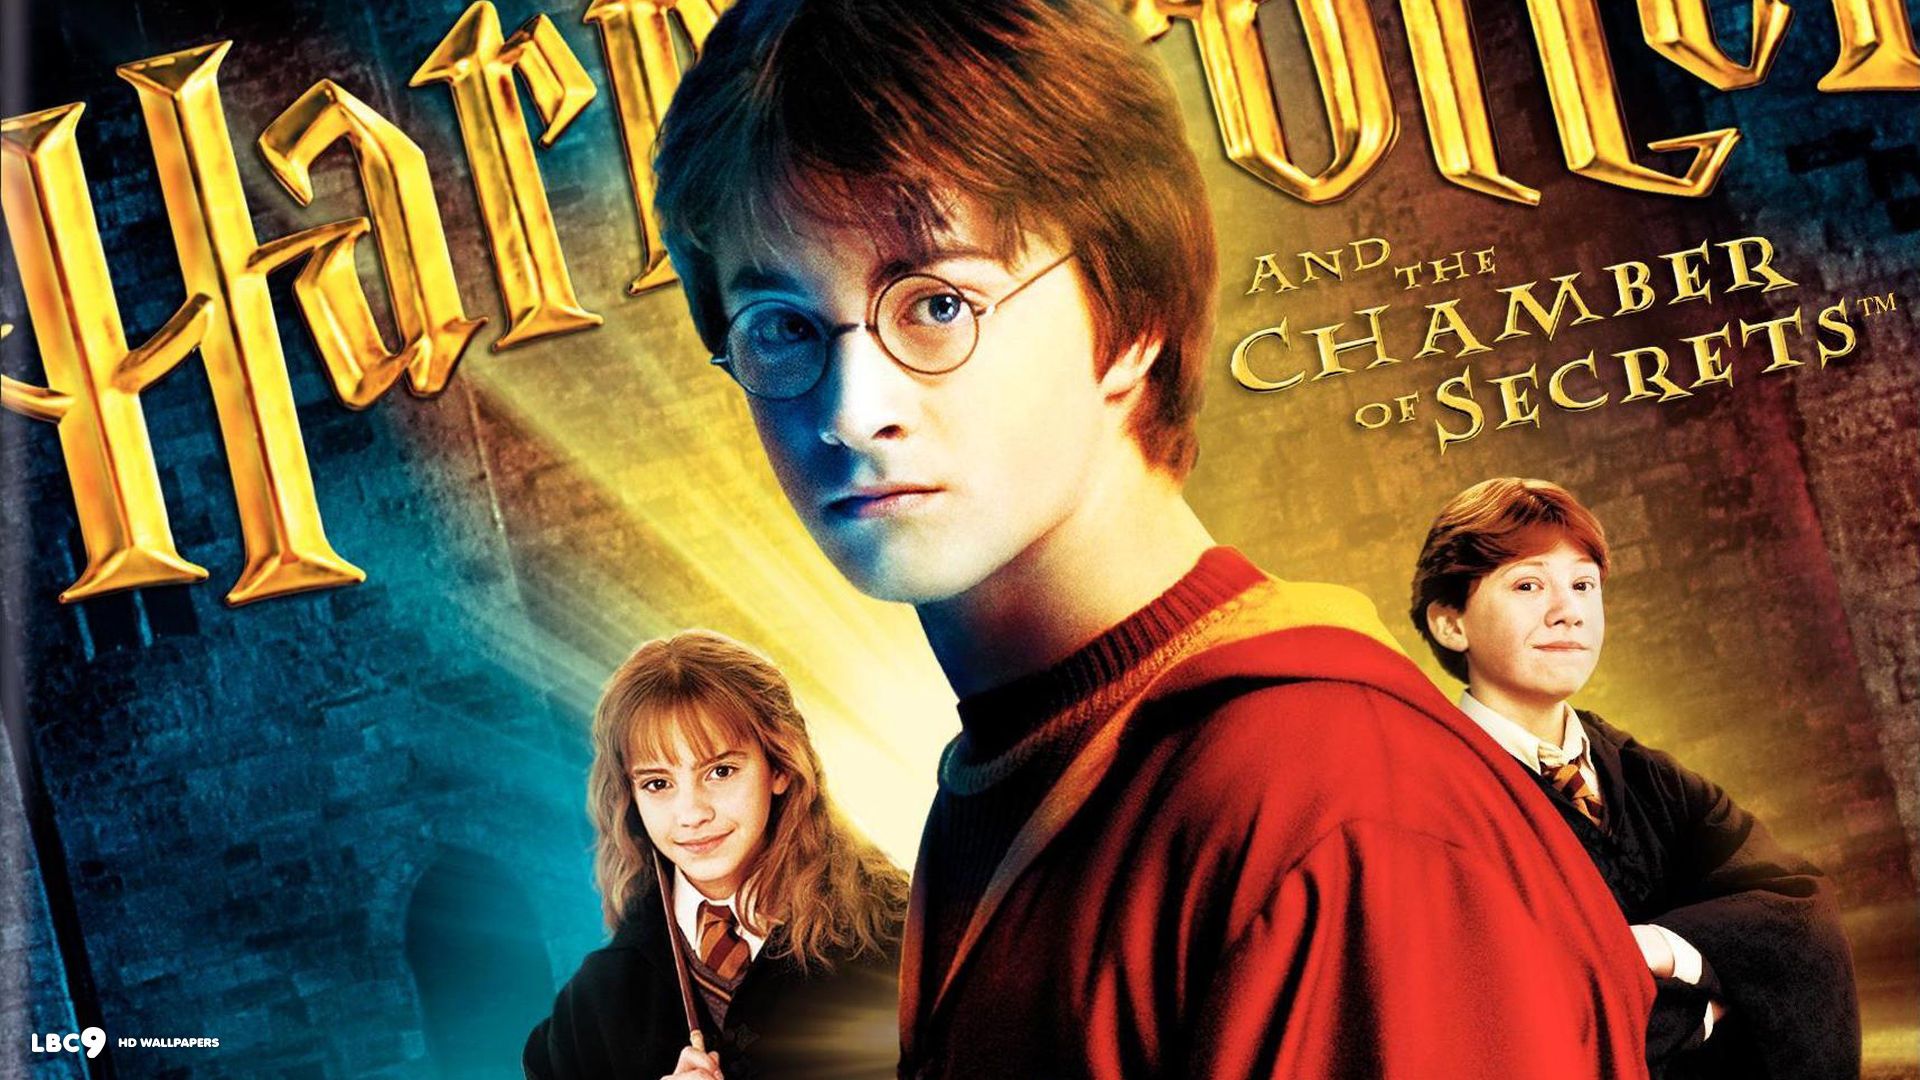 Harry potter all movies in hindi download